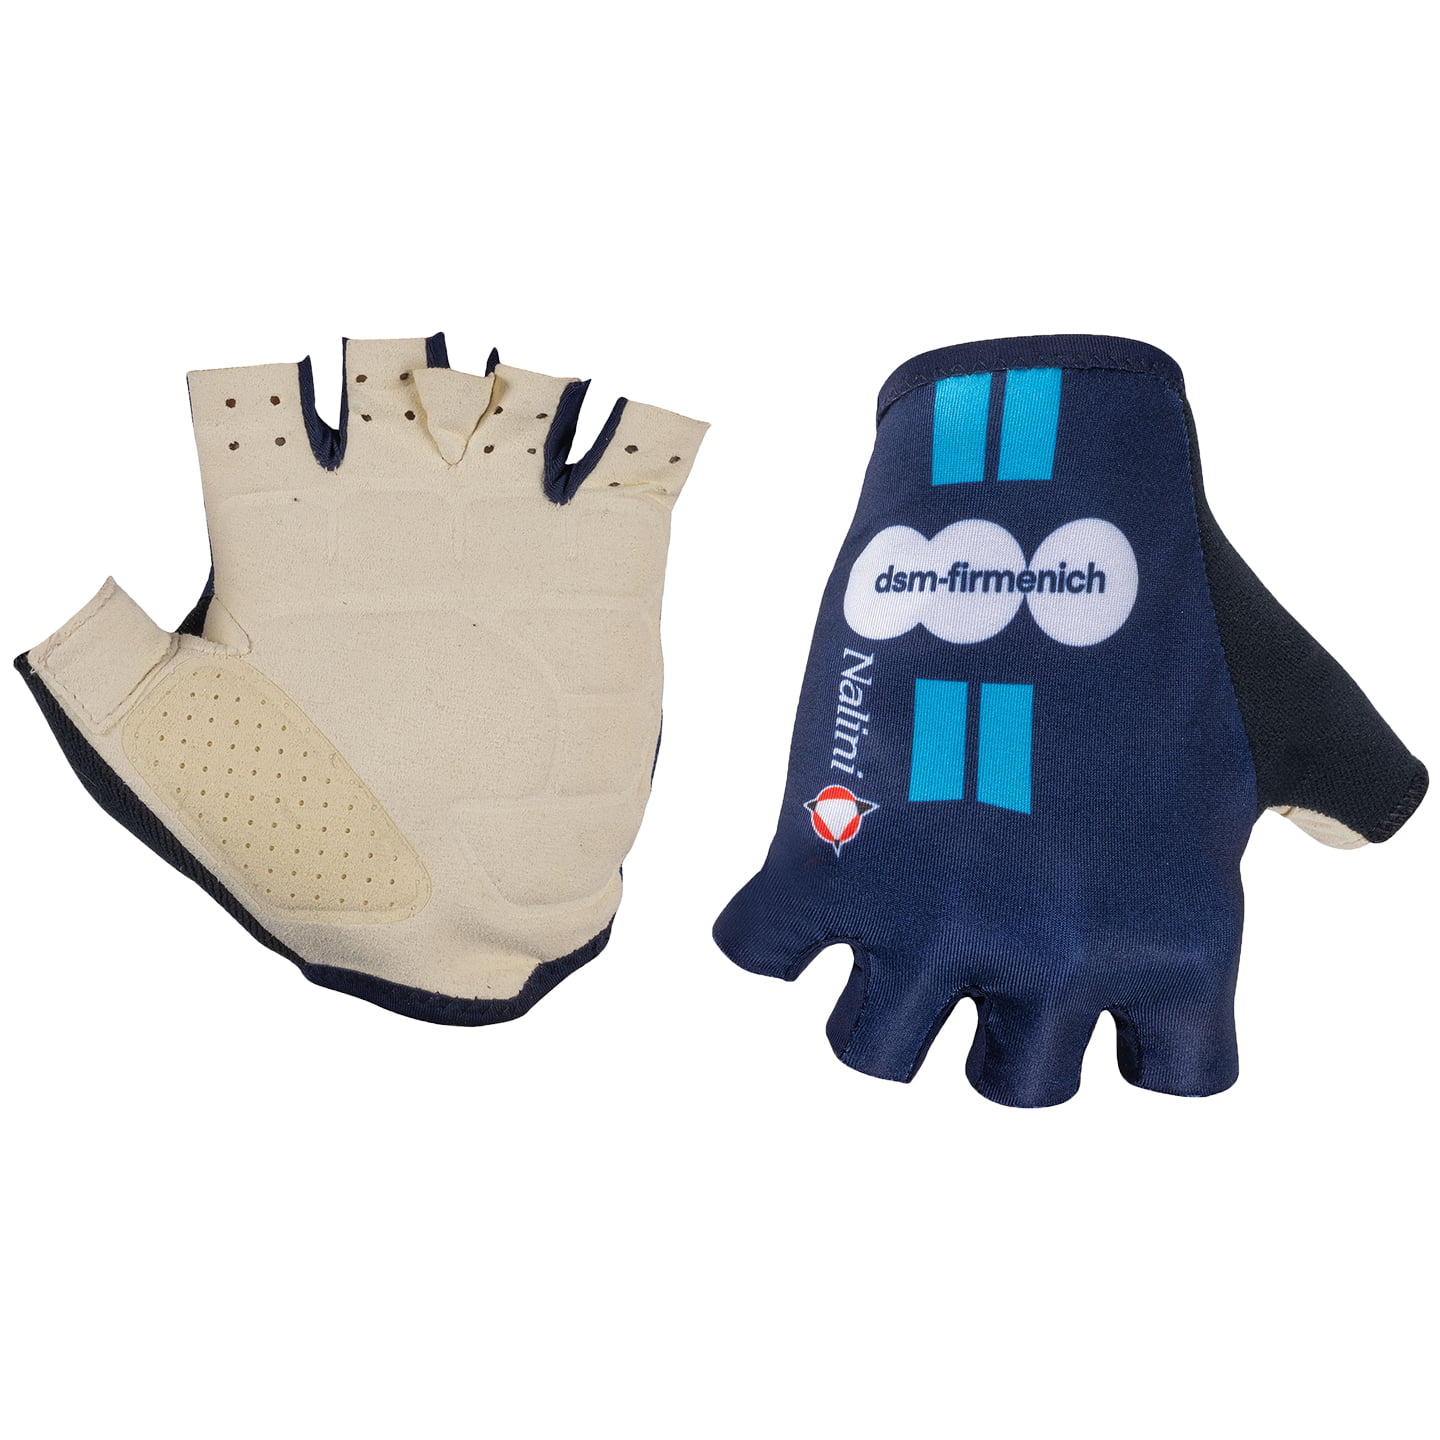 TEAM DSM TdF 2023 Cycling Gloves, for men, size XL, Cycling gloves, Cycle gear